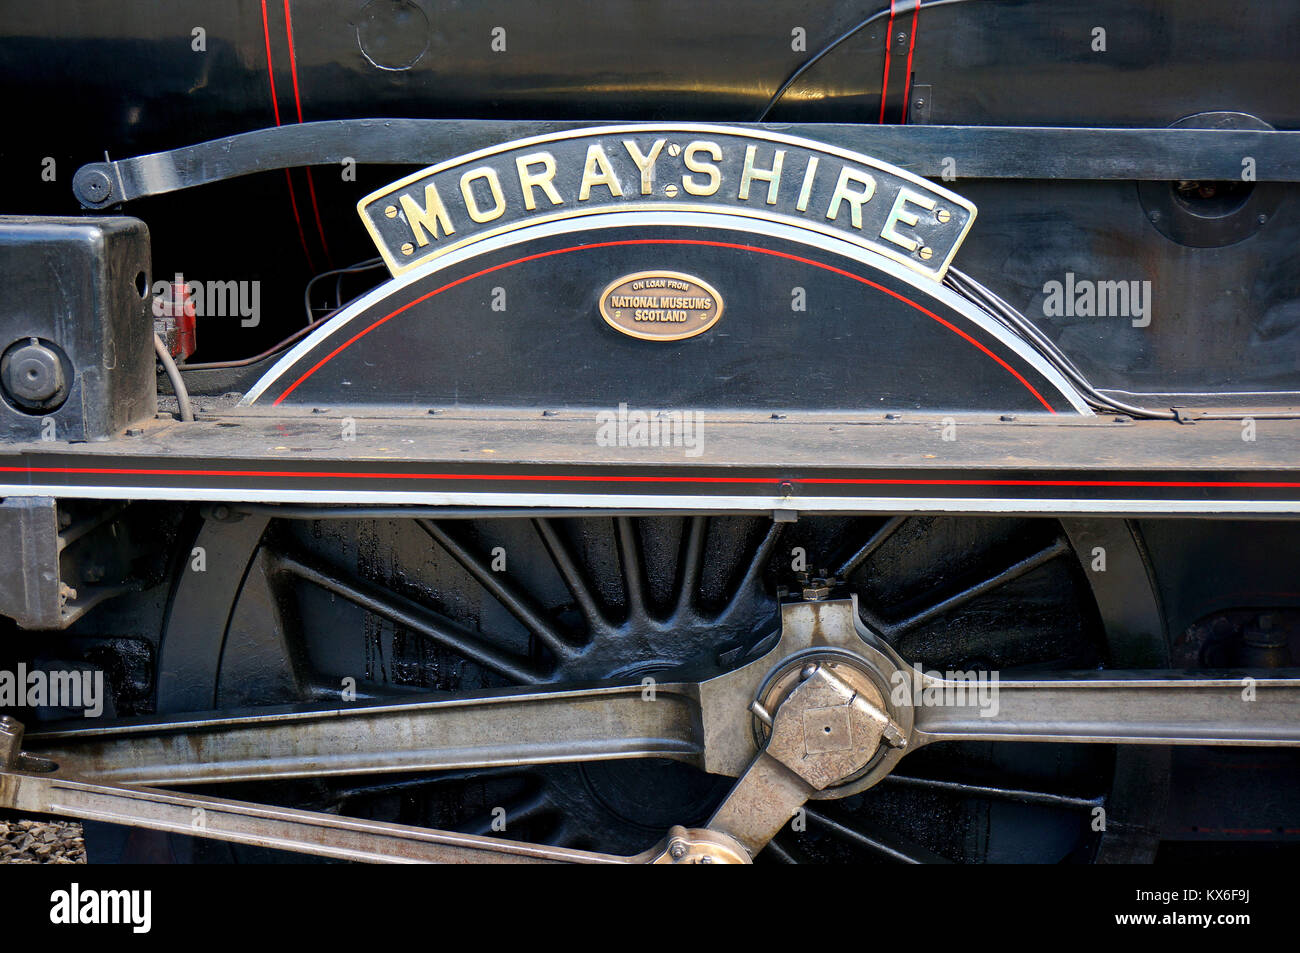 Detail of historic steam train No. 246 (62712) “Morayshire” designed by Nigel Gresley and build at Darlington Works in 1928, Bo'ness, Scotland. Stock Photo